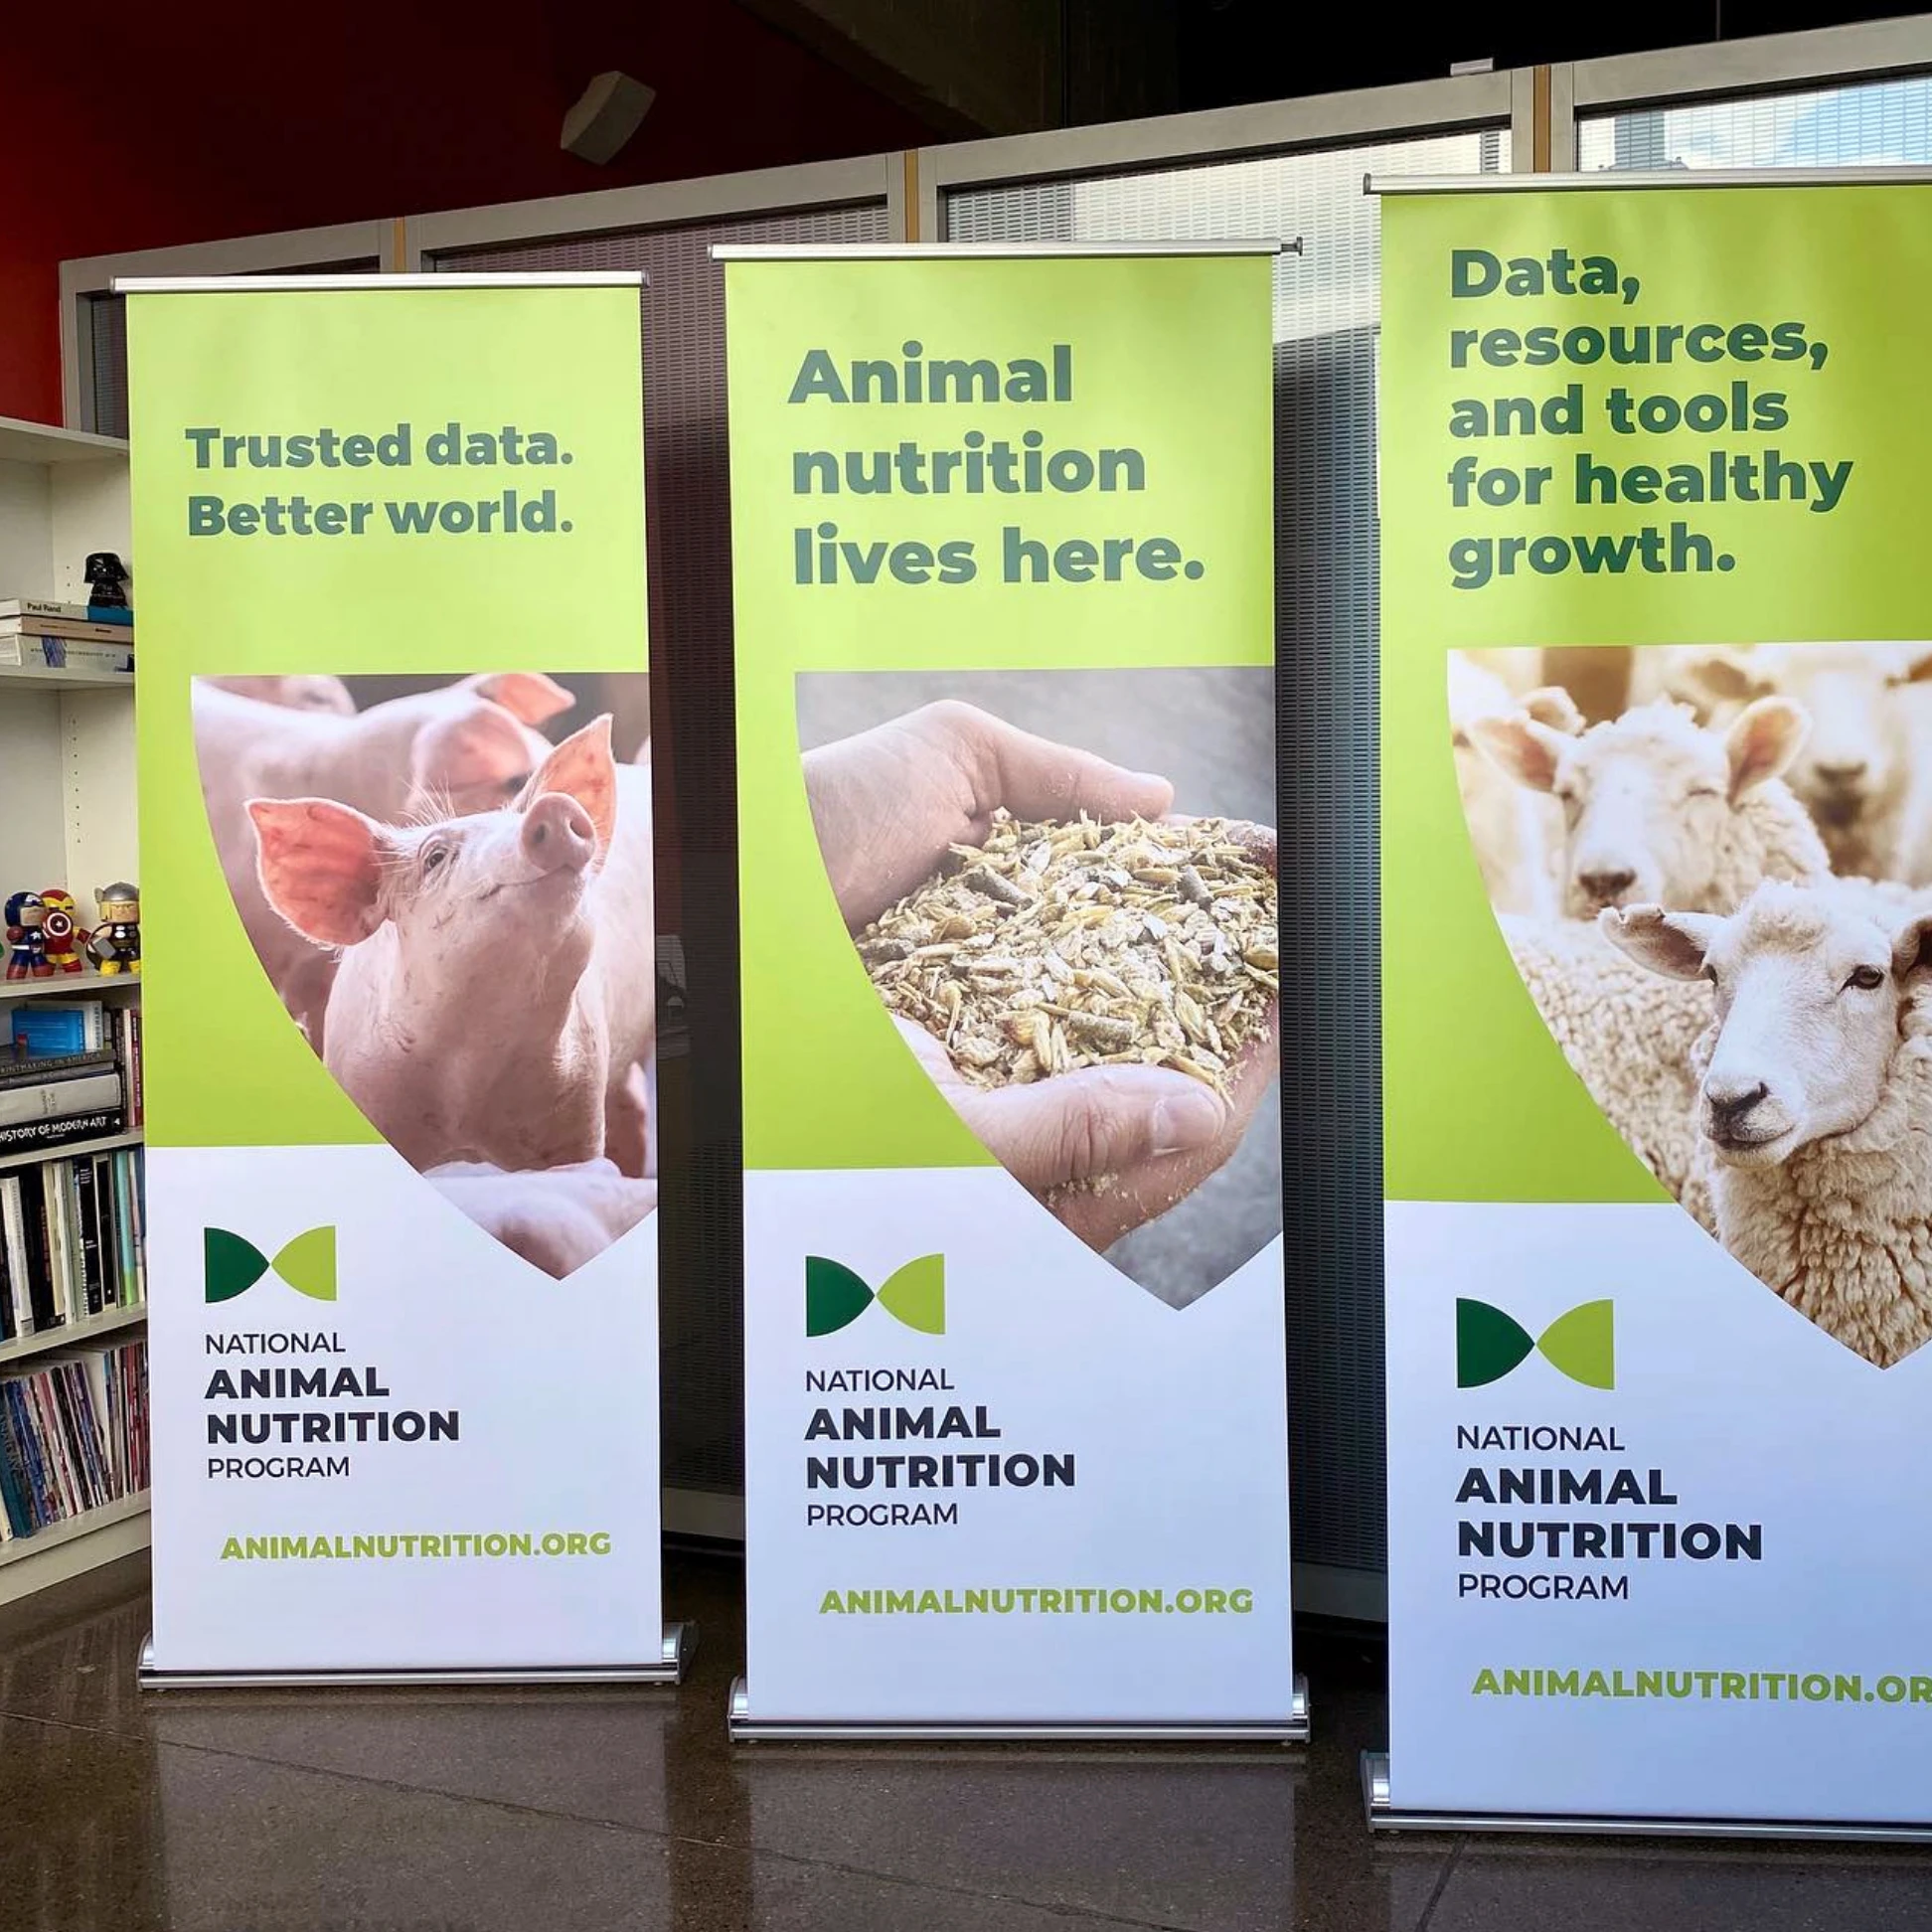 Three roll up banners are displayed in a room.